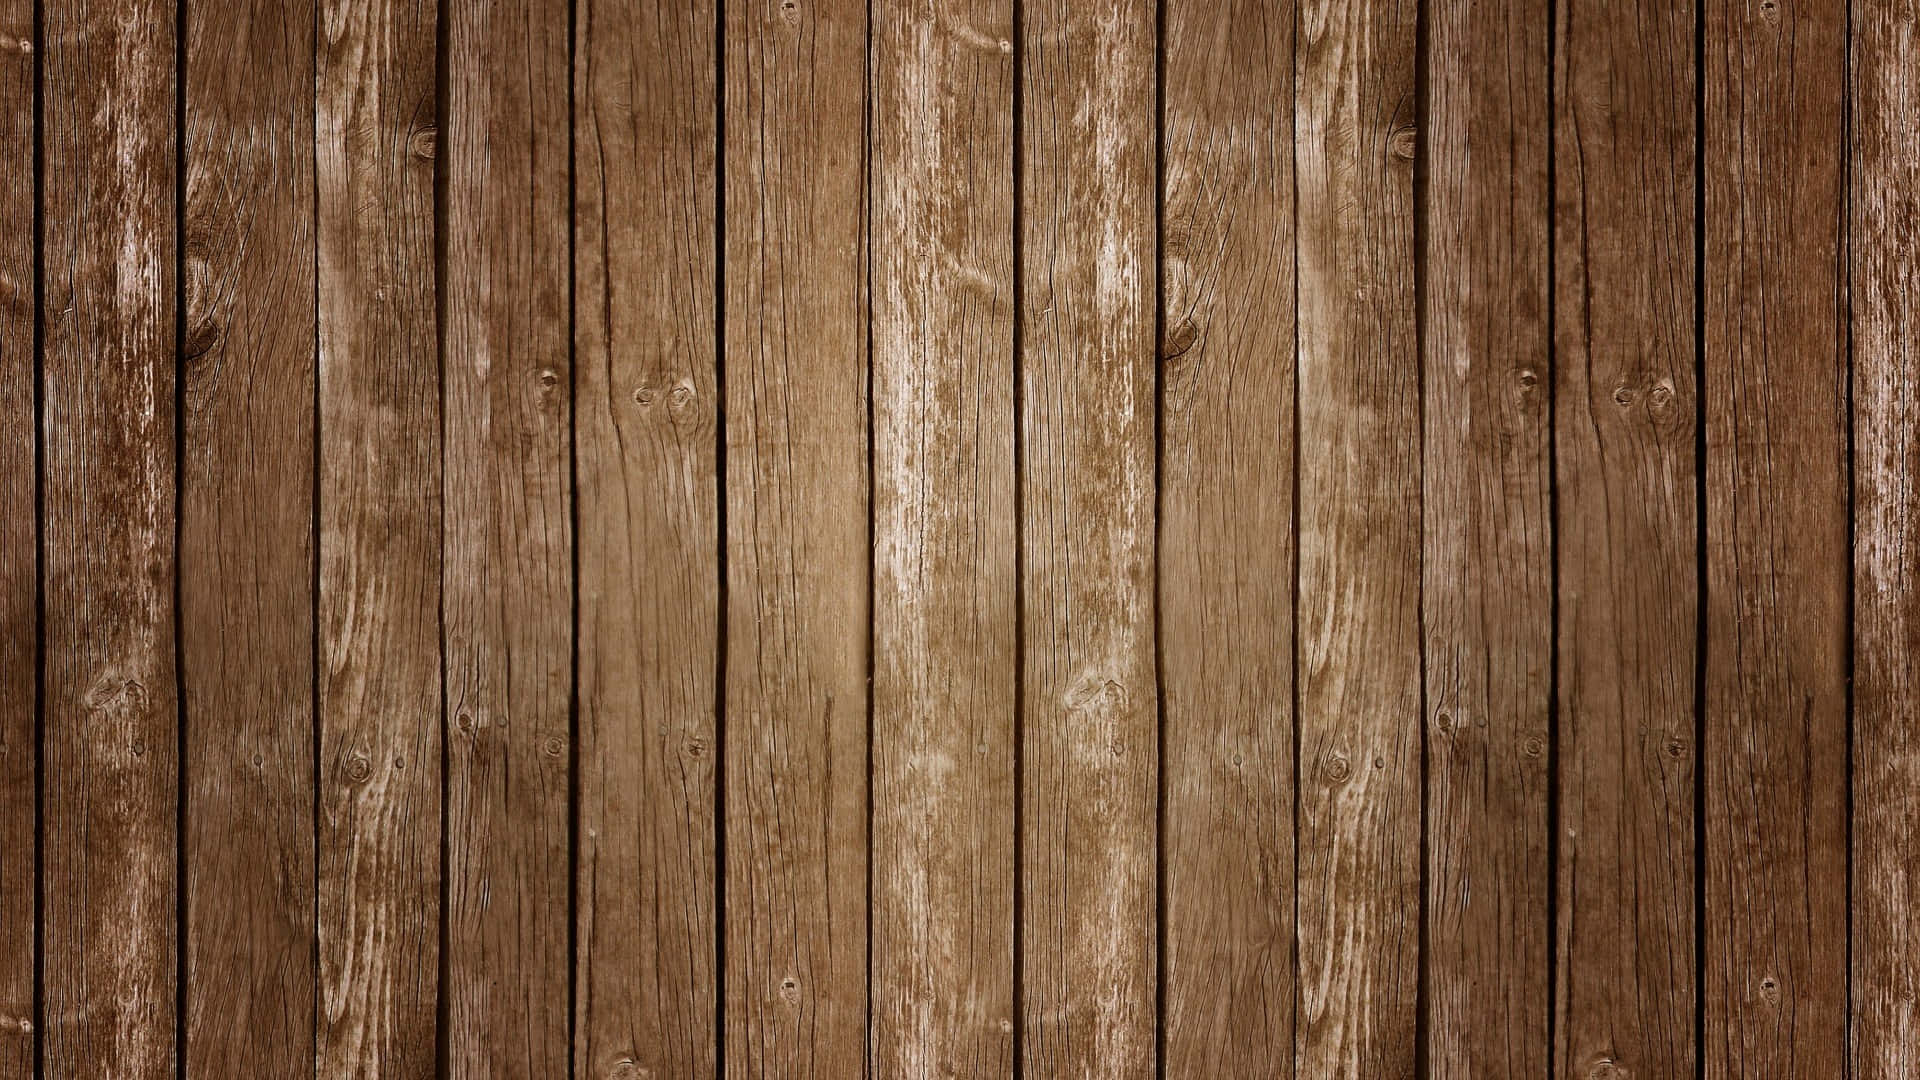 Wooden Background With Wooden Planks